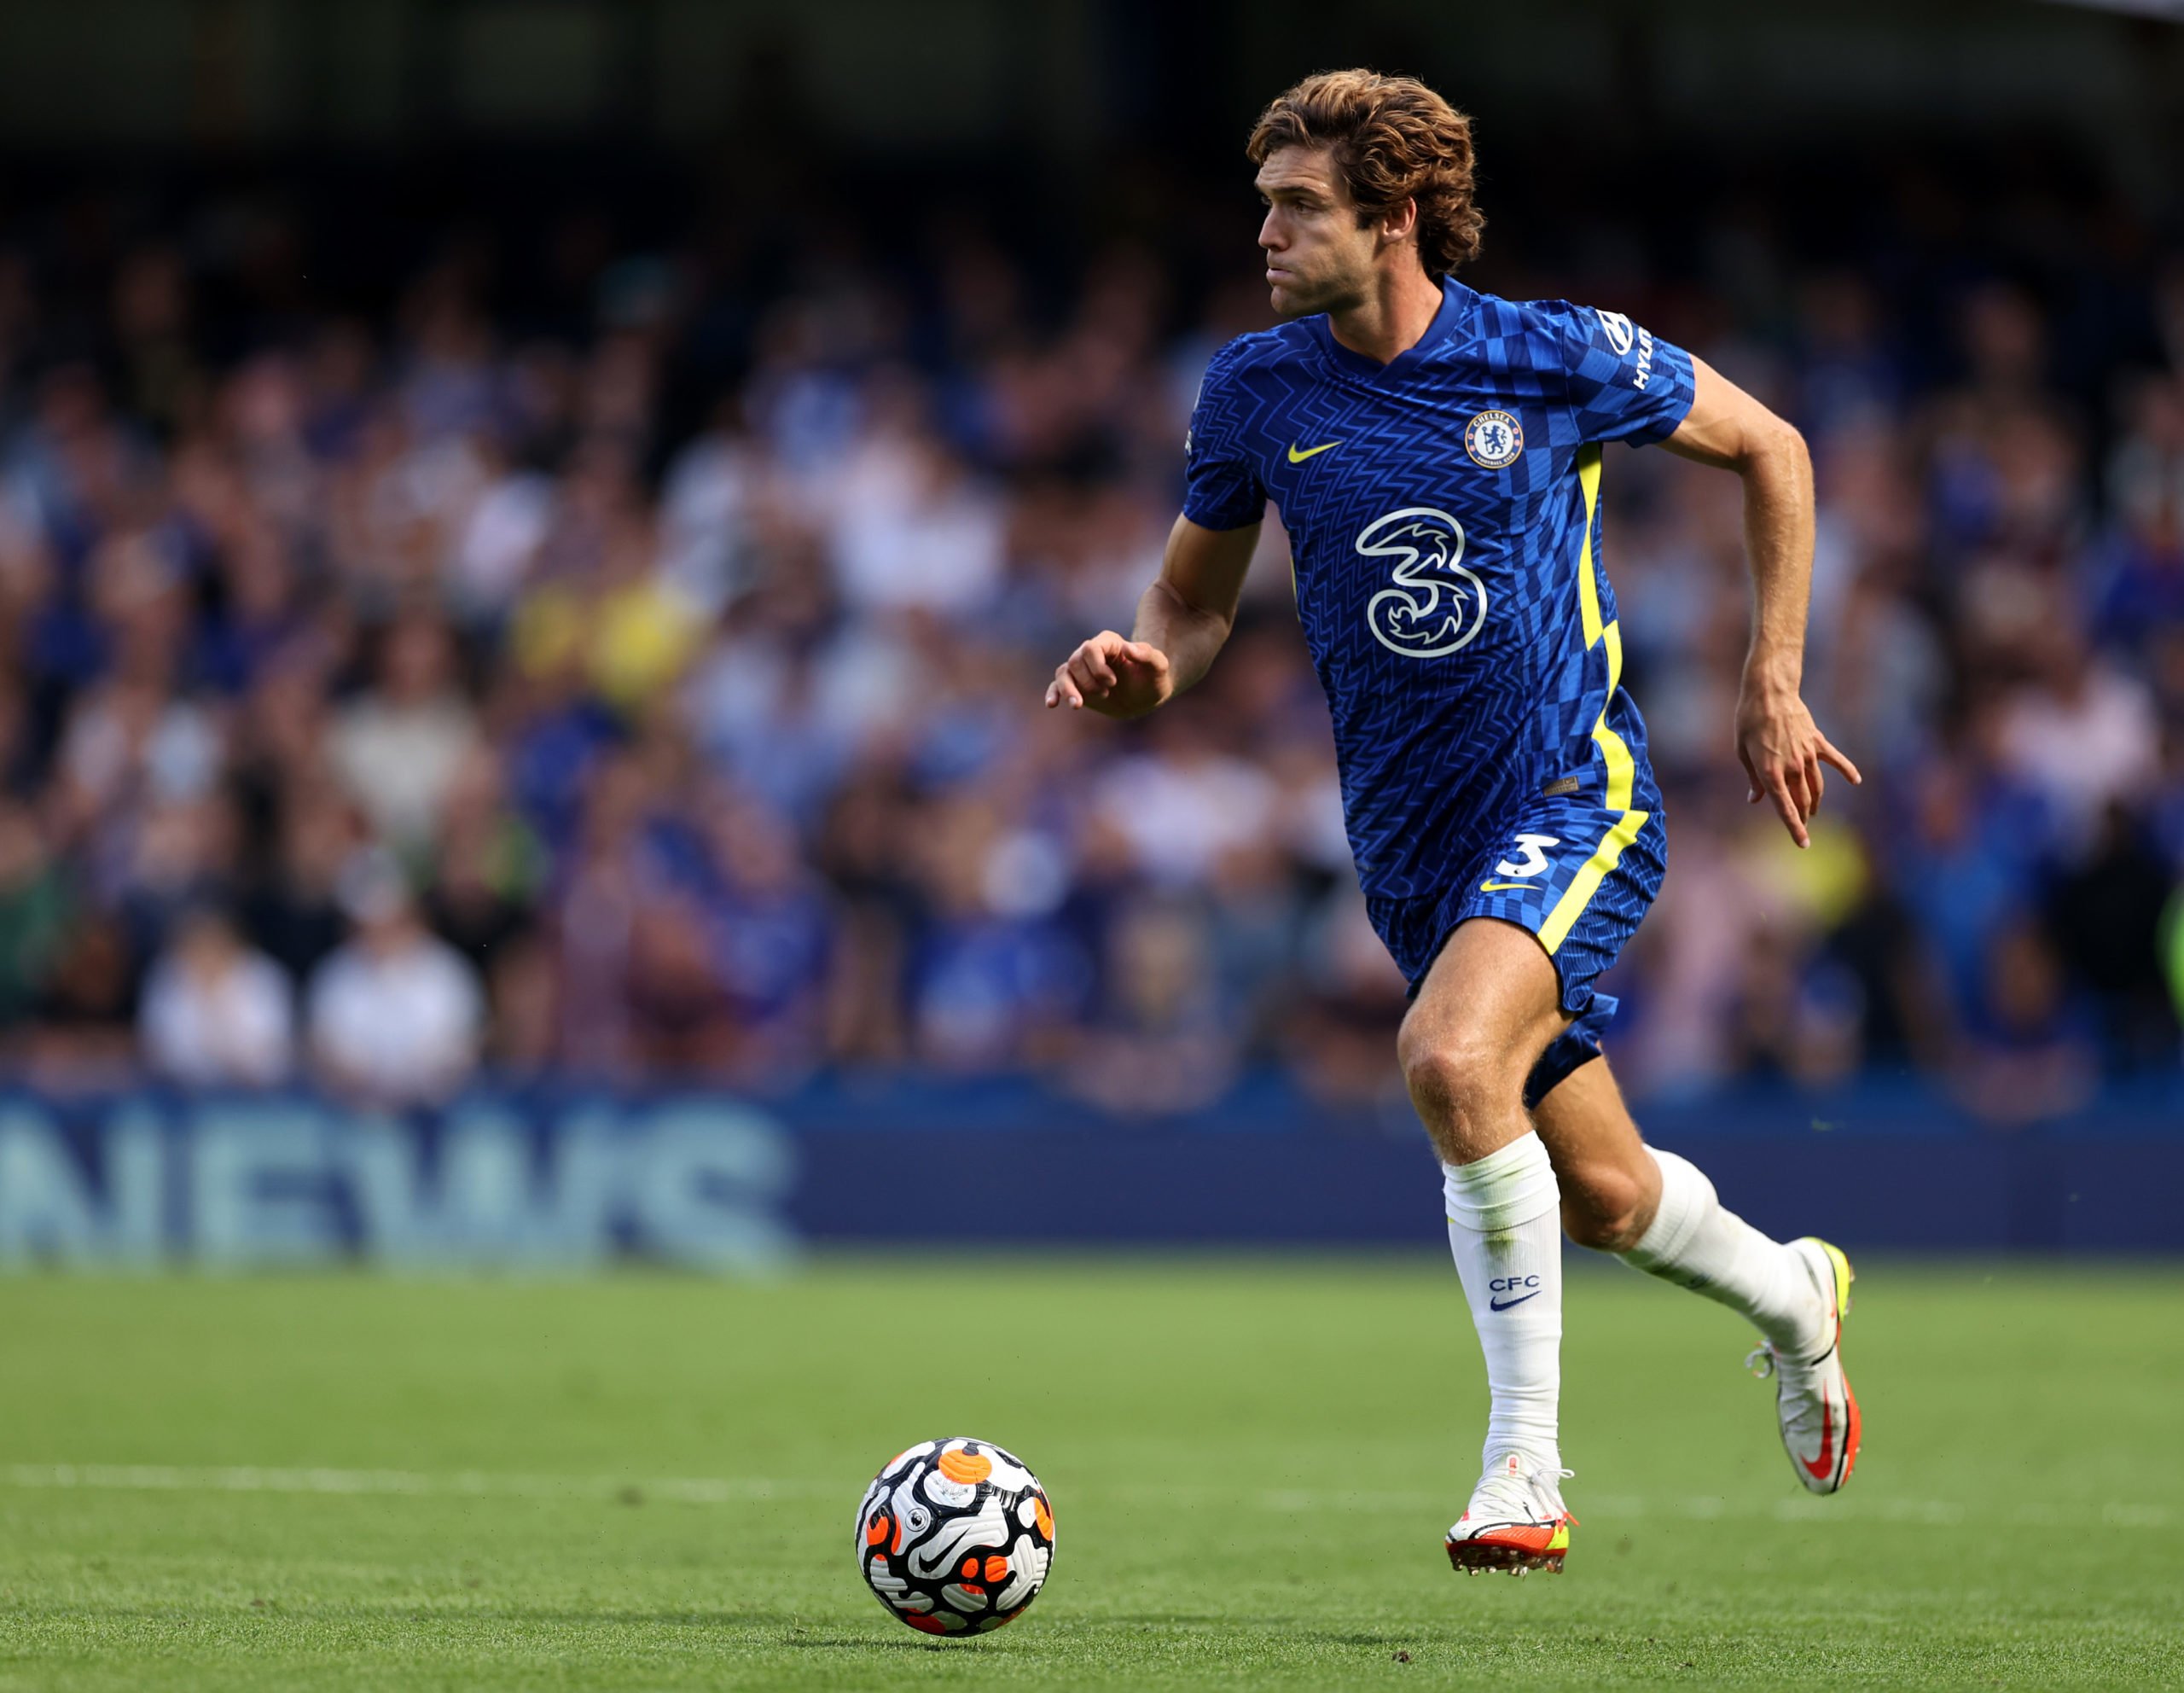 LONDON, ENGLAND - AUGUST 14: Marcos Alonso of Chelsea during the Premier League match between Chelsea  and  Crystal Palace at Stamford Bridge on August 14, 2021 in London, England. (Photo by Eddie Keogh/Getty Images)The 4th Official uses images provided by the following image agency: Getty Images (https://www.gettyimages.de/) and Imago Images (https://www.imago-images.de/)